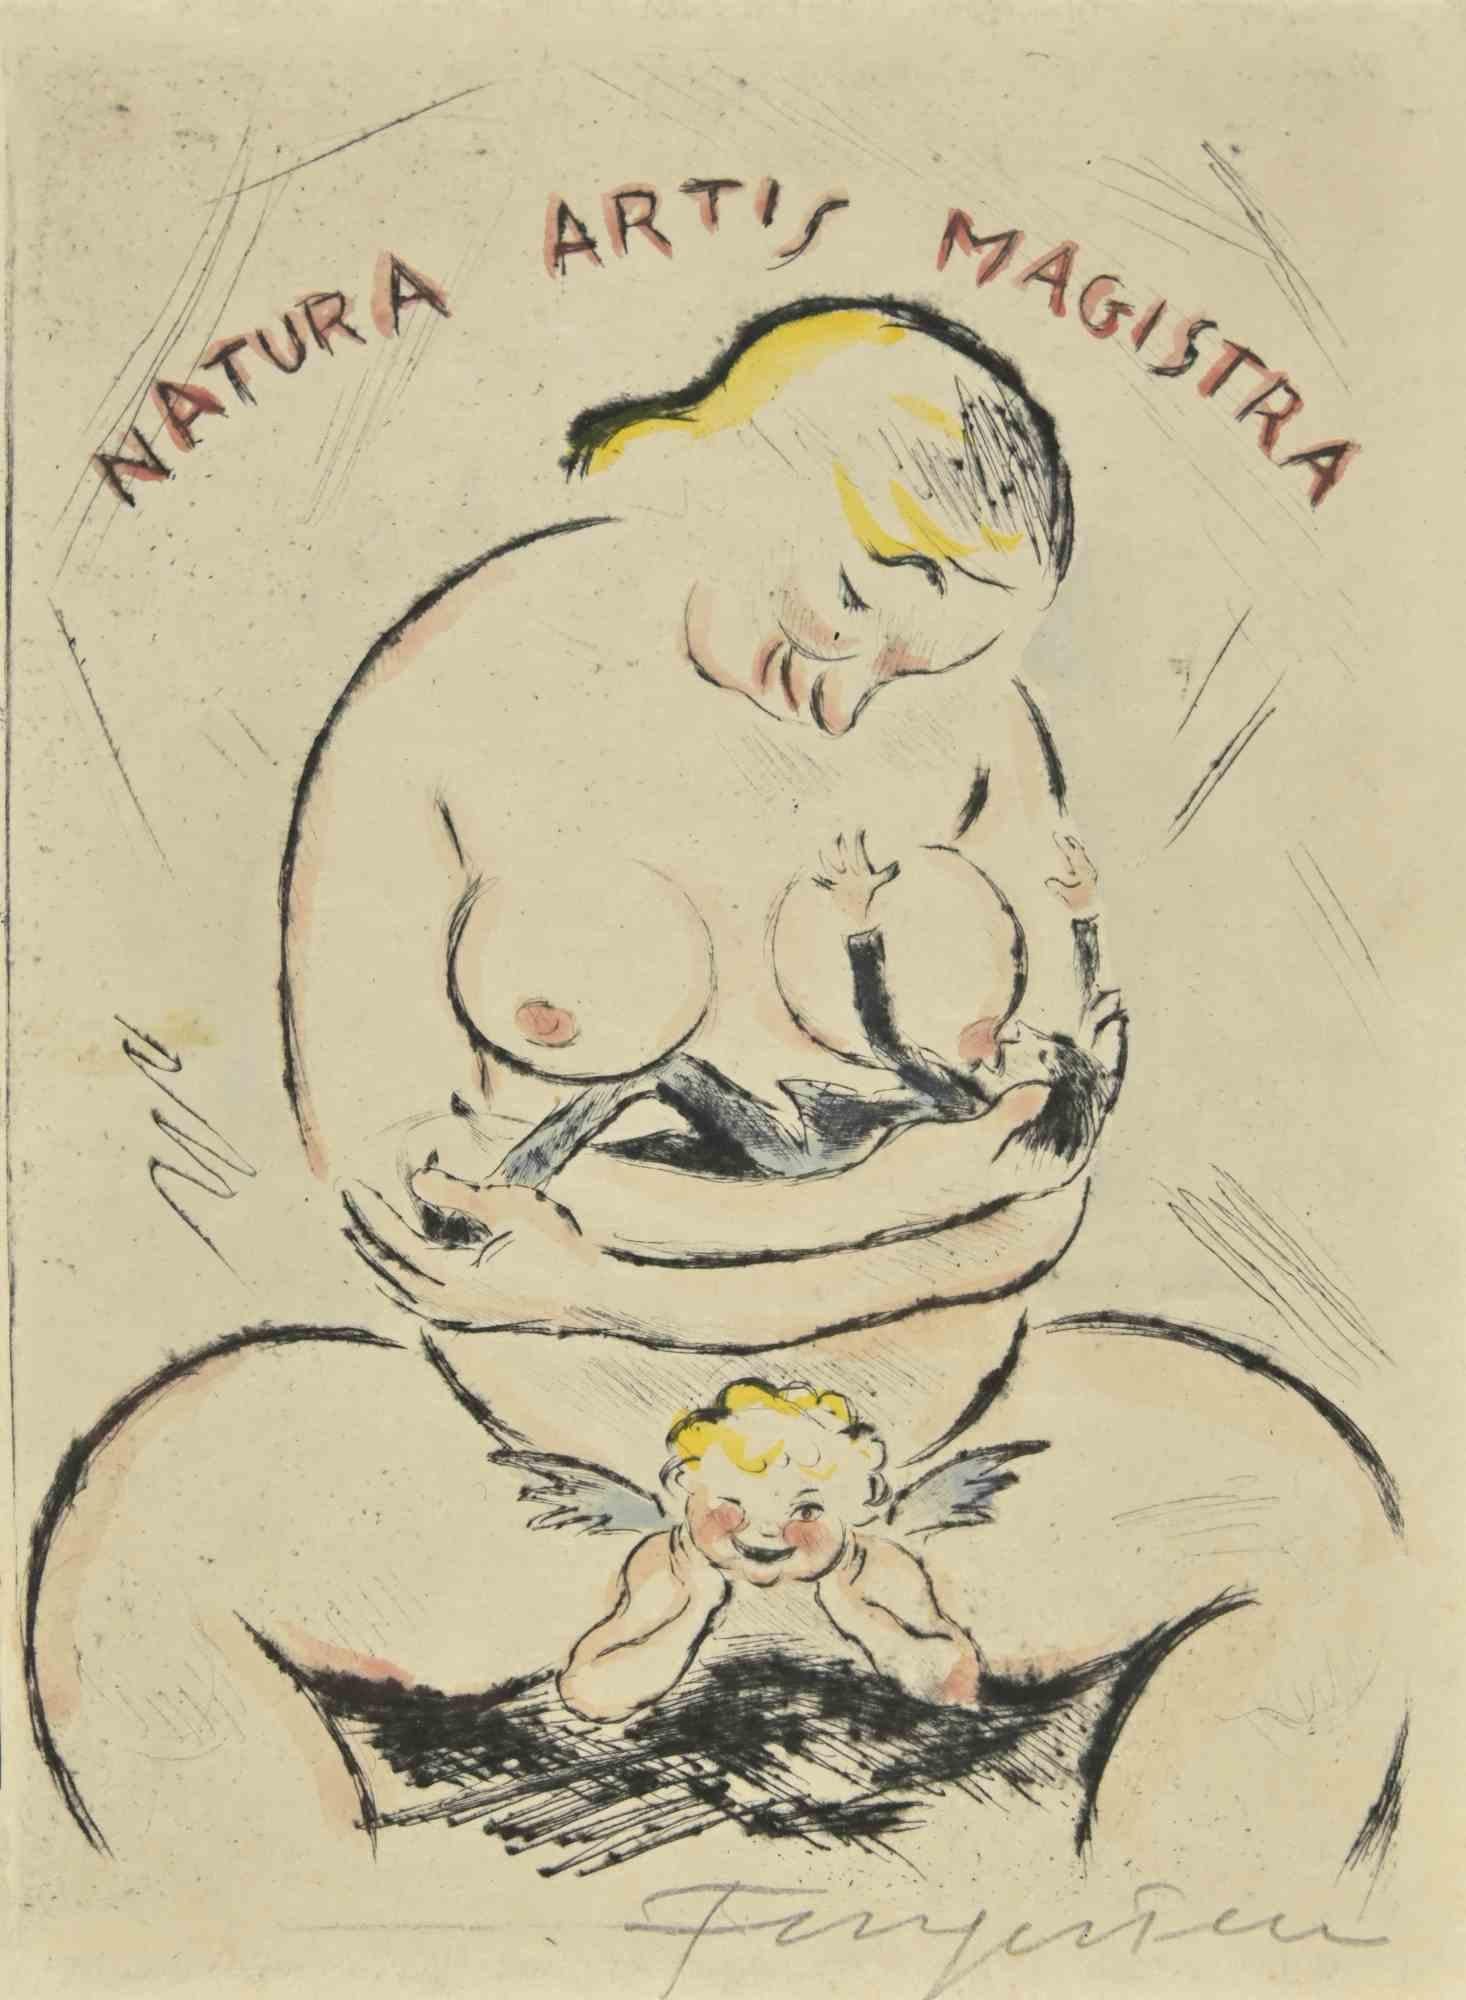 Ex Libris - Natura Artis Magistra is a colored Woodcut print created by  Michel Fingesten.

Hand Signed on the lower right margin.

Very good condition.

Michel Fingesten (1884 - 1943) was a Czech painter and engraver of Jewish origin. He is